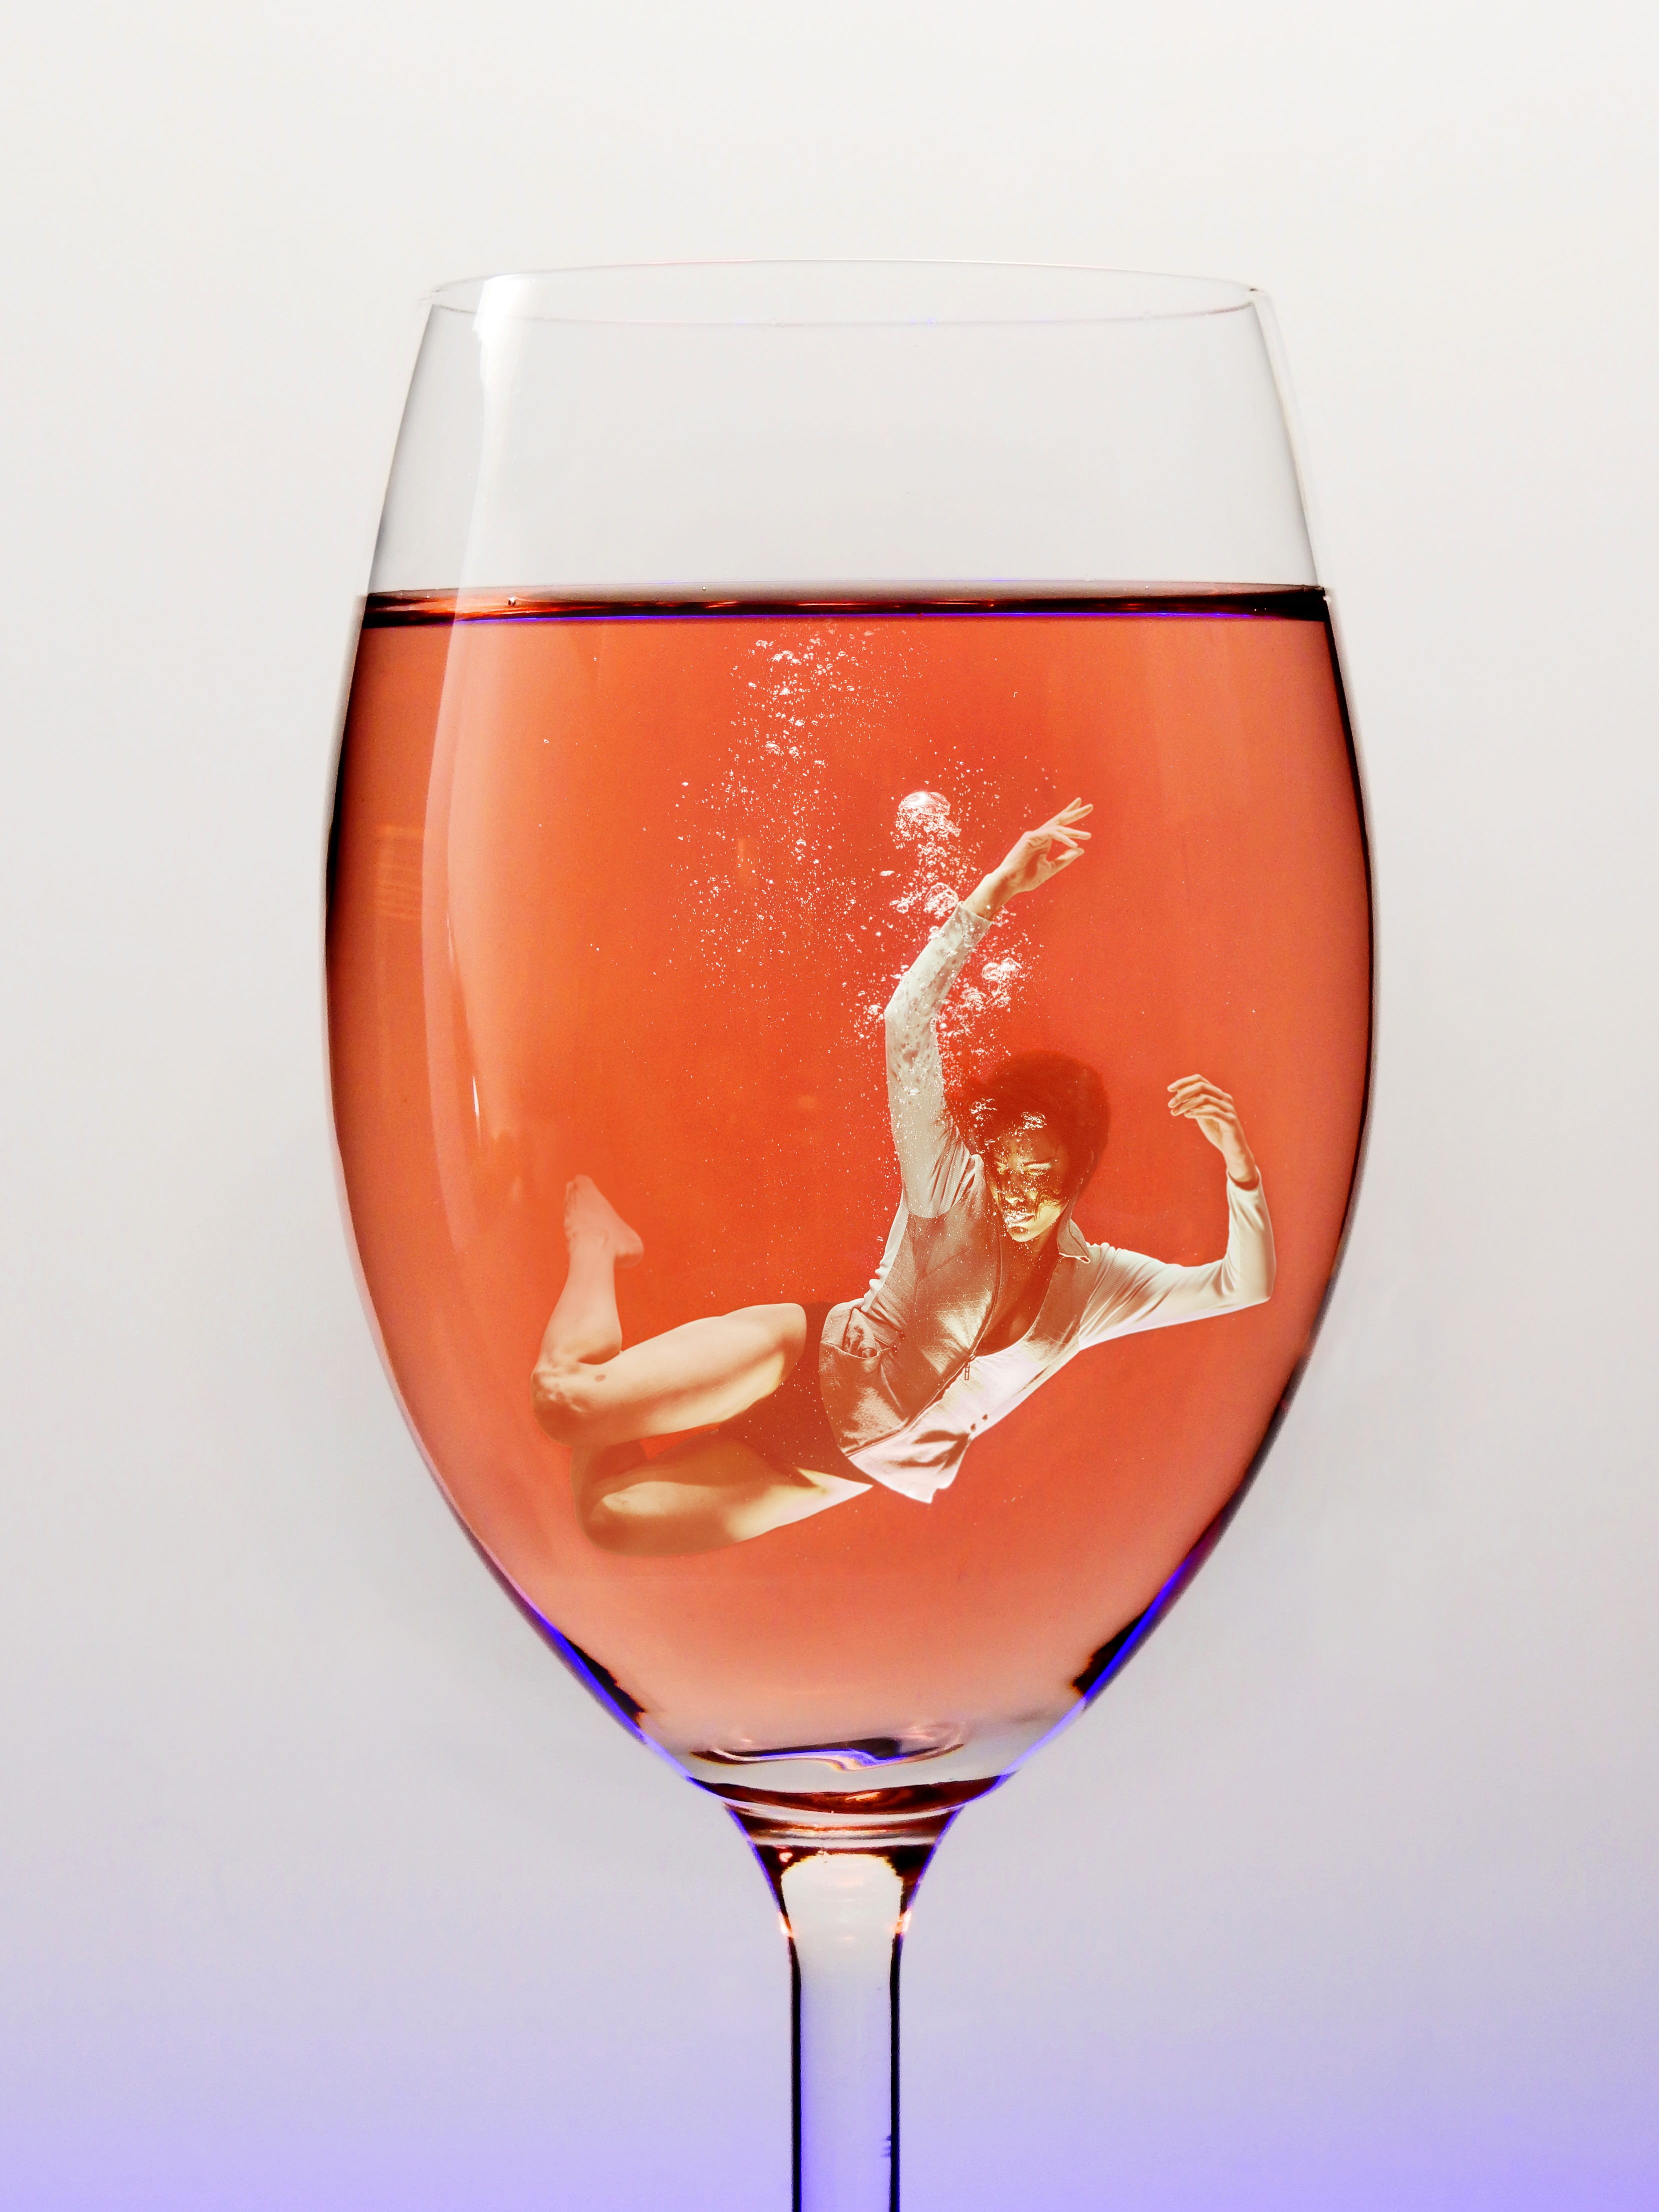 clear wine glass, drunk, alcohol, woman, lady, girl, party, alcoholics